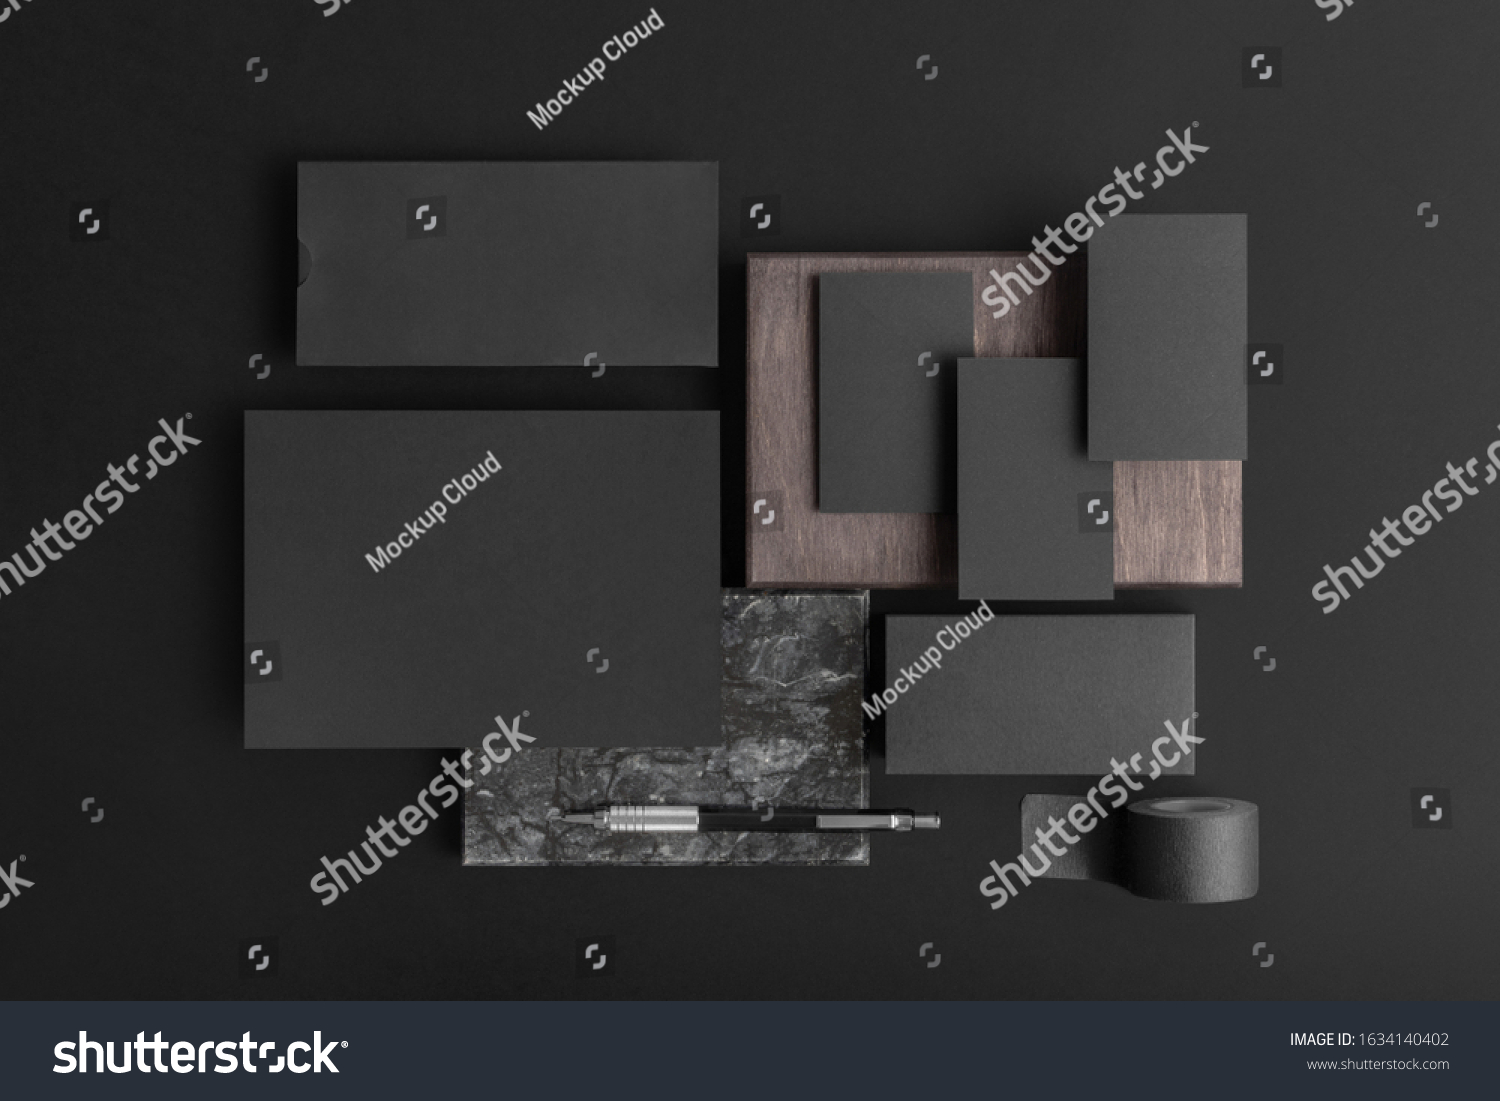 Real photo, black stationery branding mockup template, on black background to place your design. #1634140402